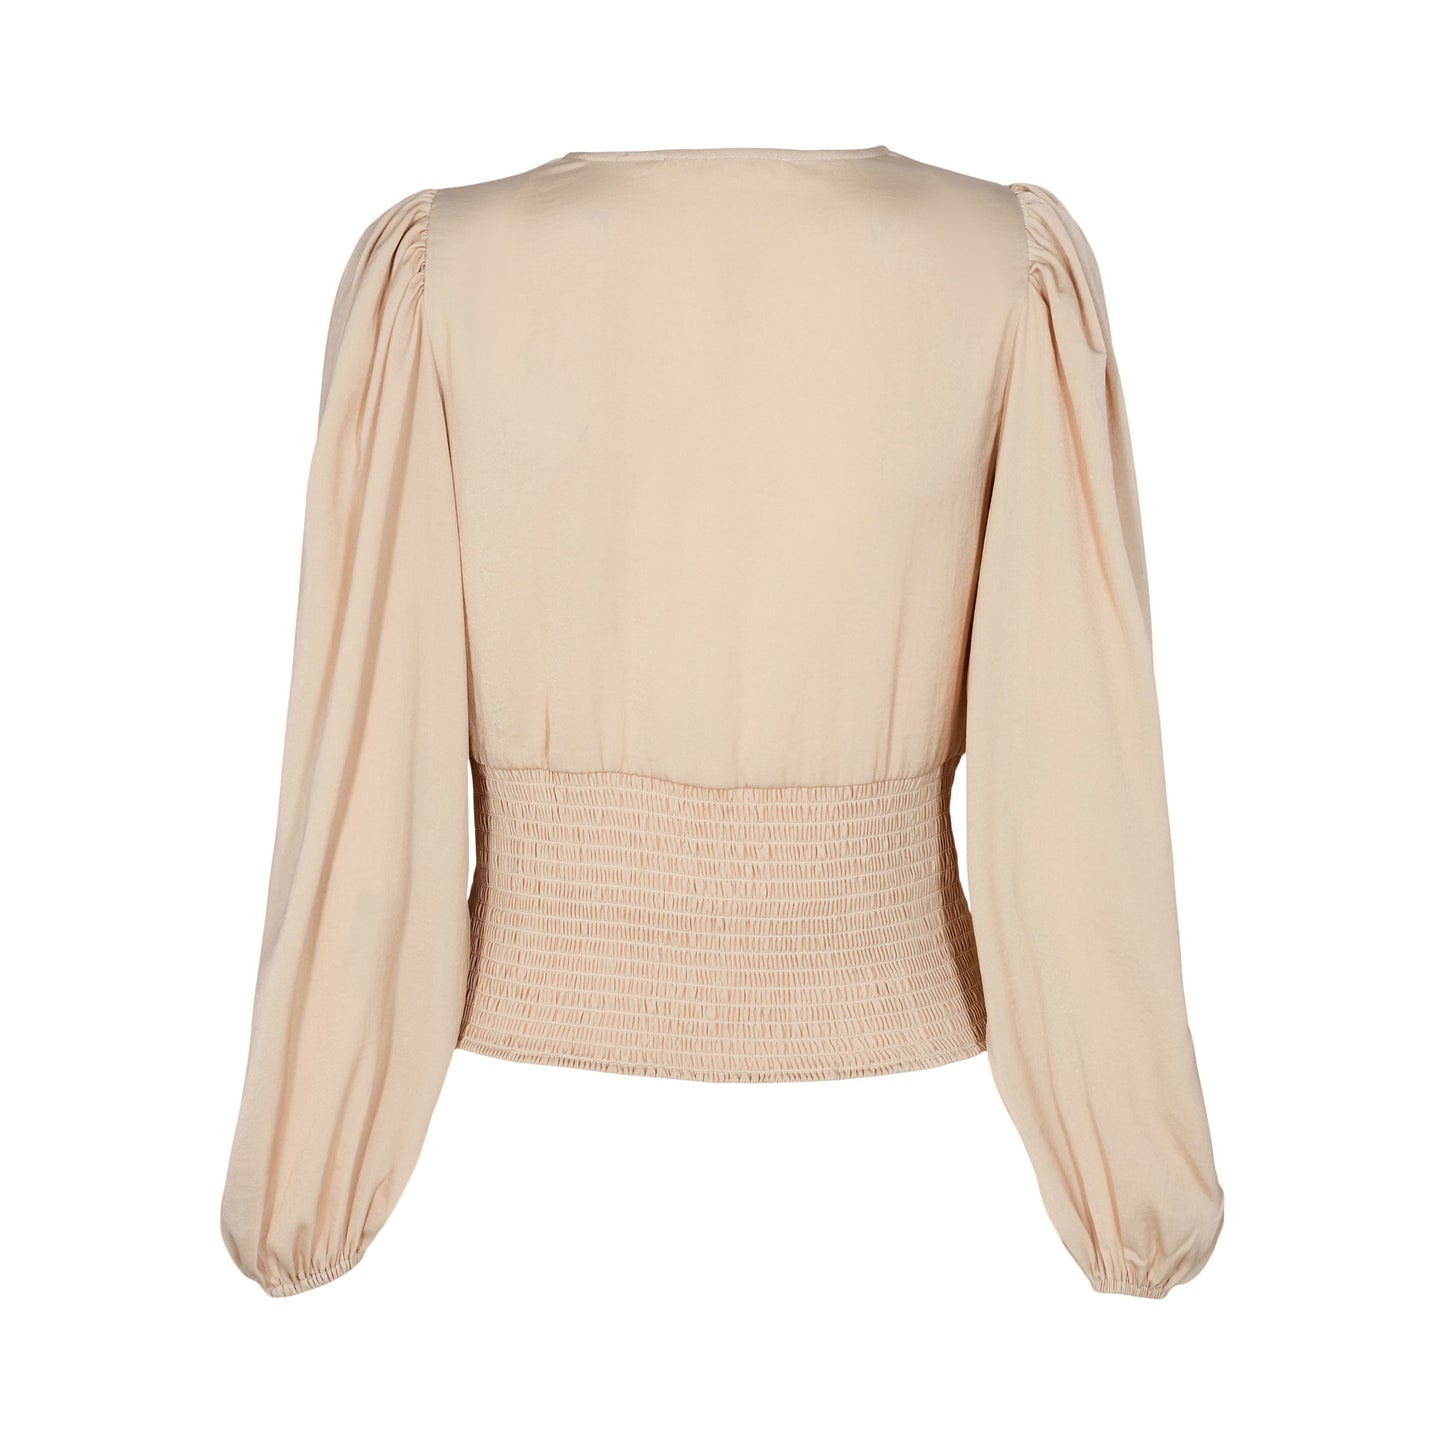 Sofie Schnoor ruched blouse - nude